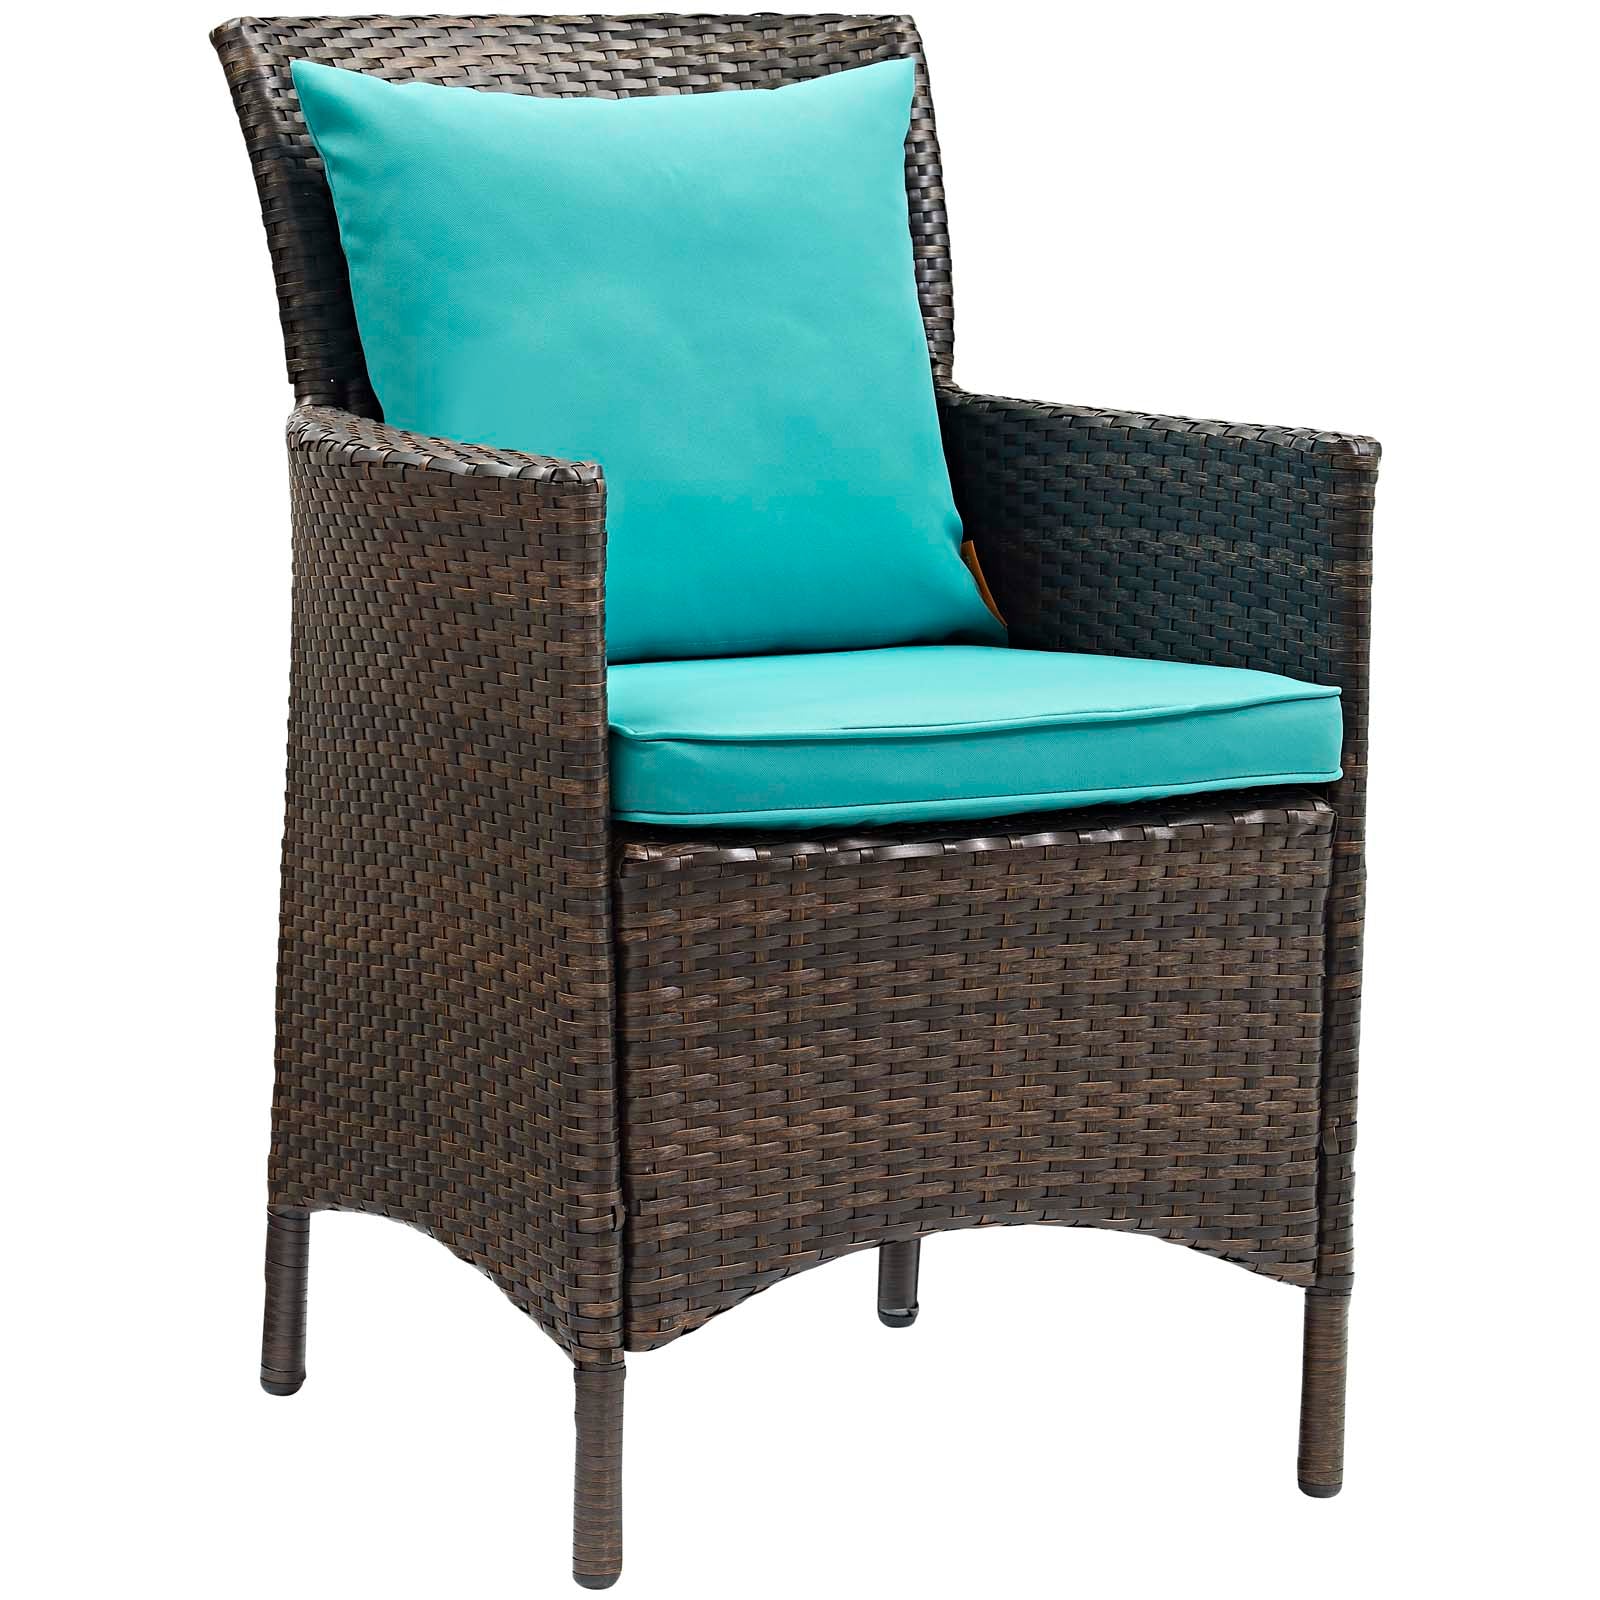 Modway Outdoor Dining Sets - Conduit 7 Piece Outdoor Patio Wicker Rattan Dining Set Brown Turquoise